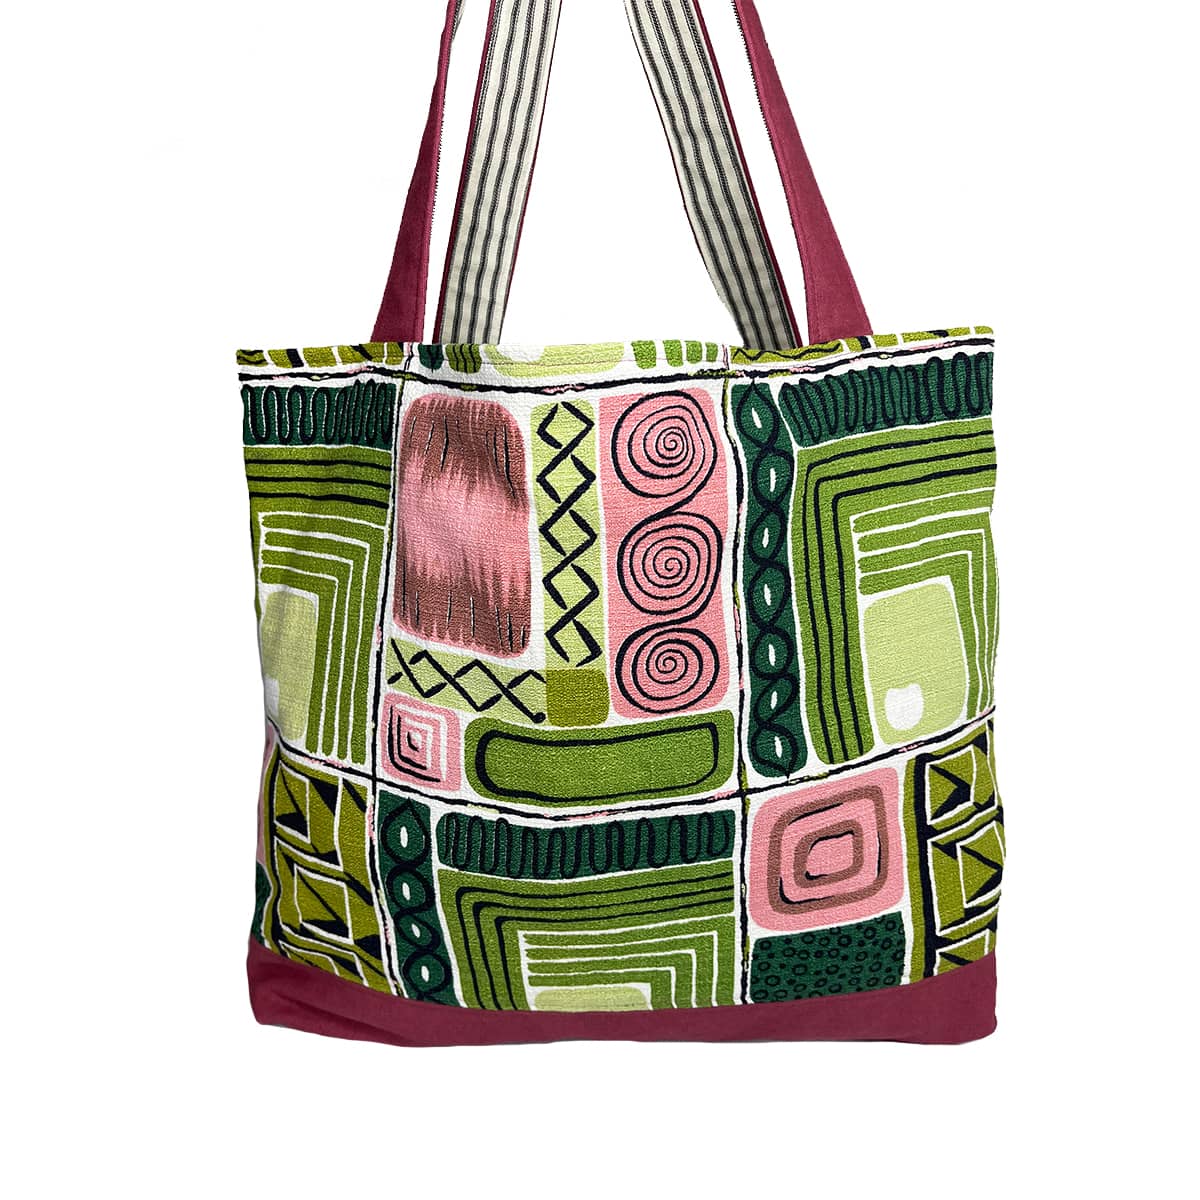 Up Island Bag – Pink and Green Abstract